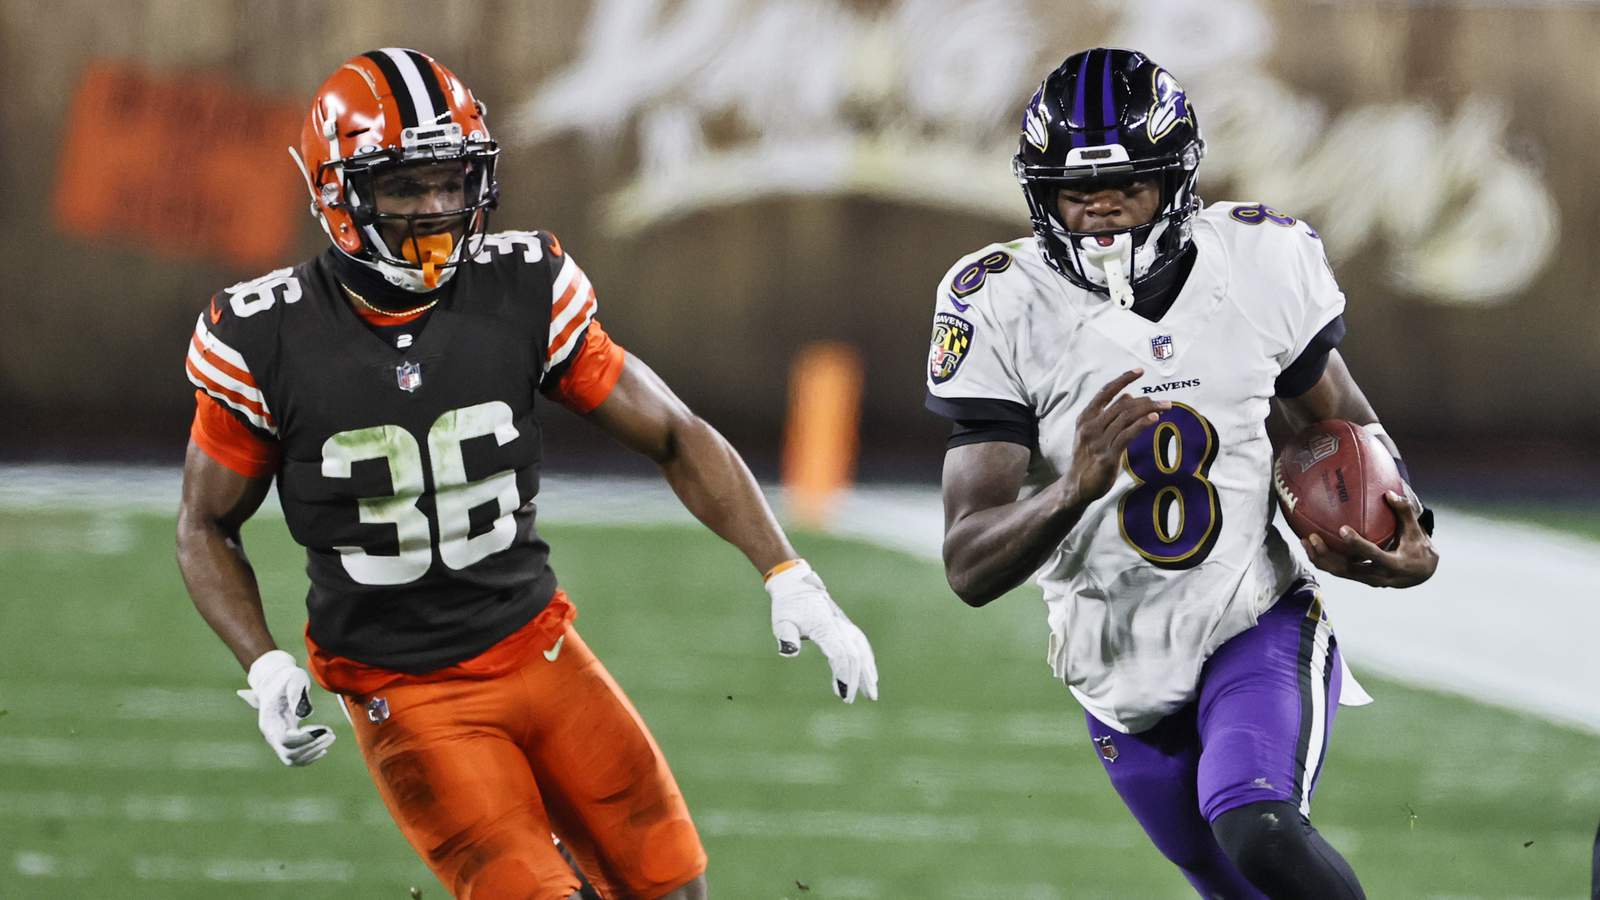 Jackson returns to save Ravens with 47-42 win over Browns